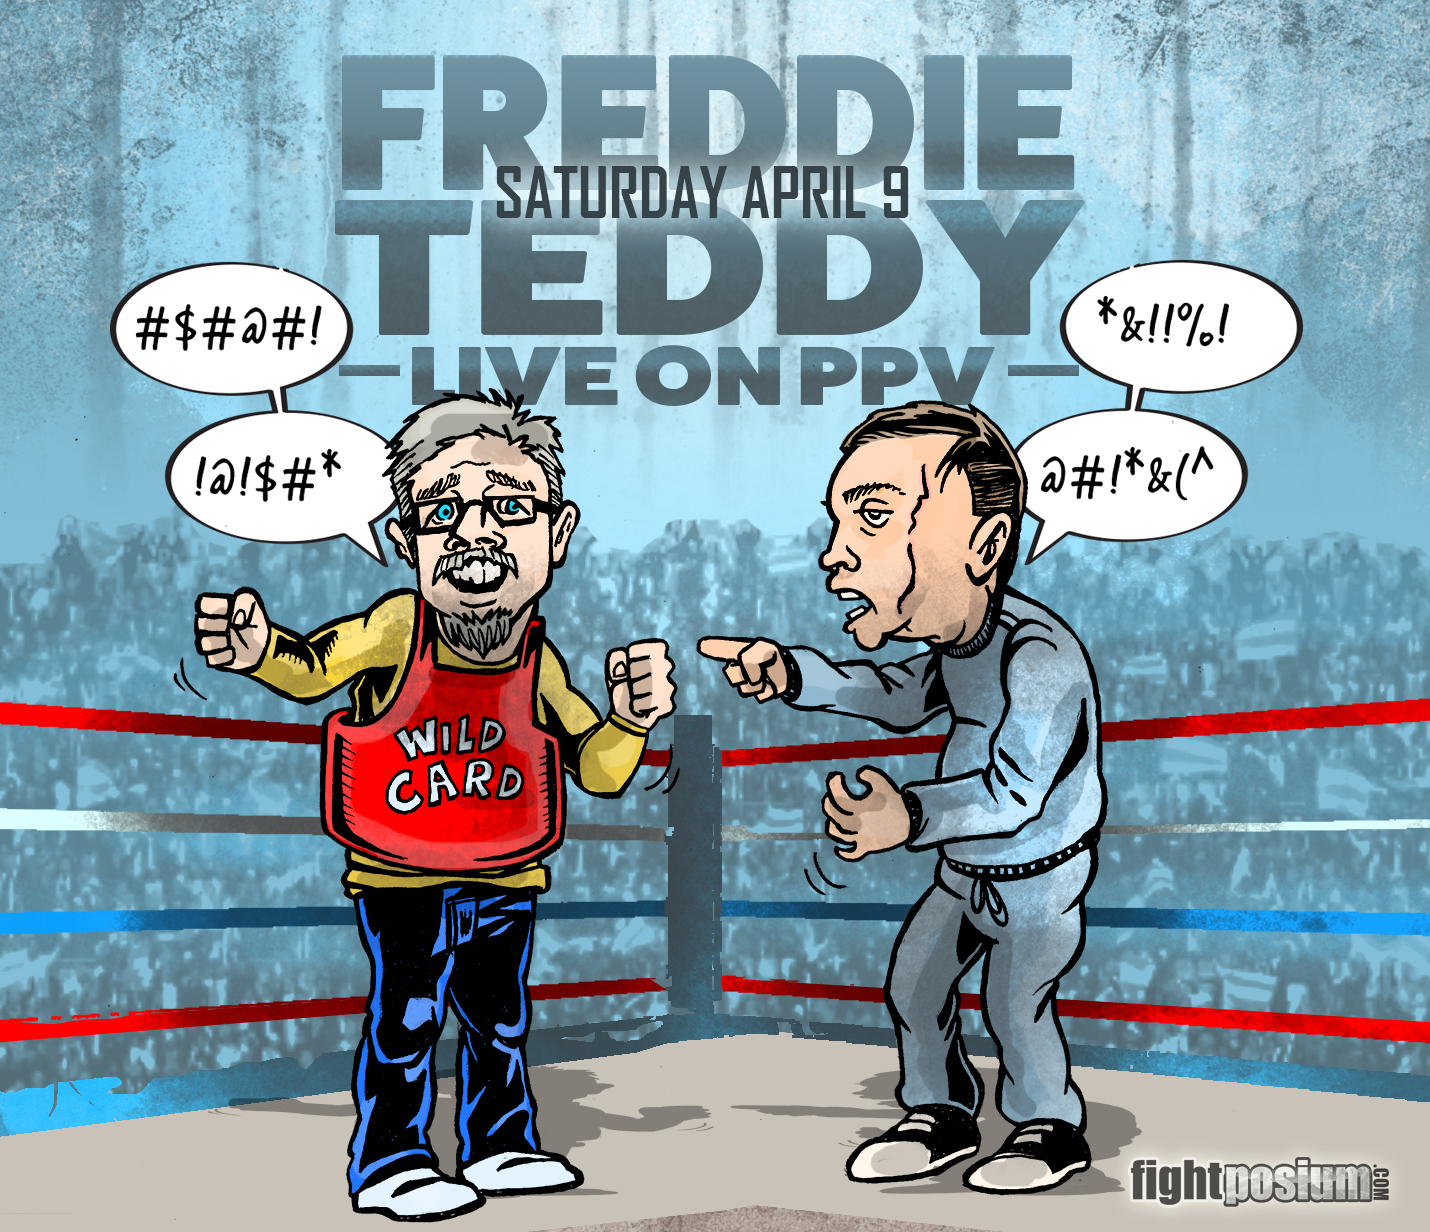 You are currently viewing Freddie Teddy April 9 Live On PPV